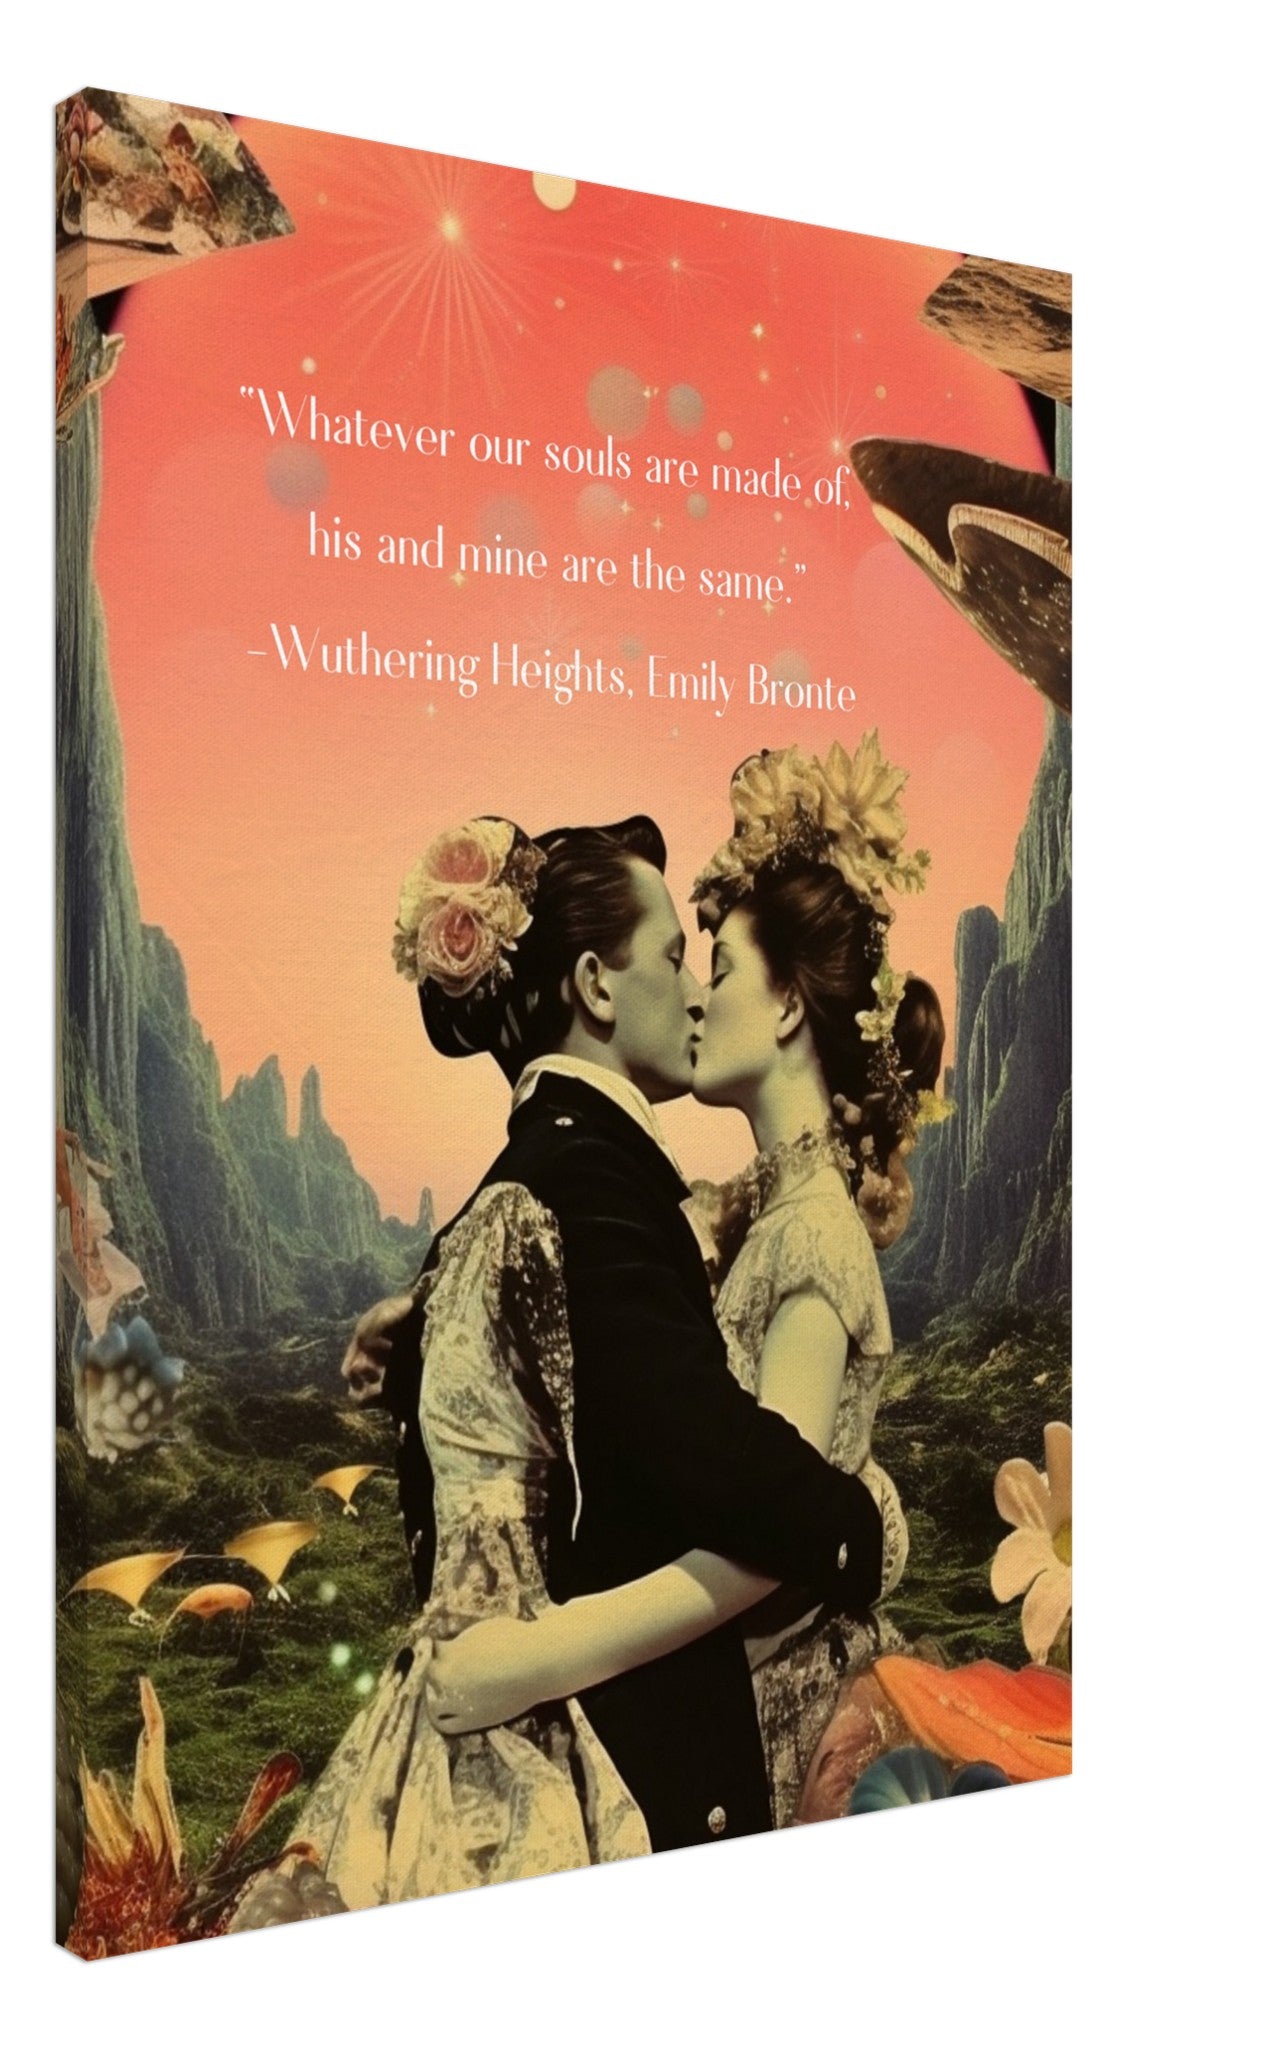 'Whatever our souls' from Wuthering Heights by Emily Bronte, Quote Canvas Art Print